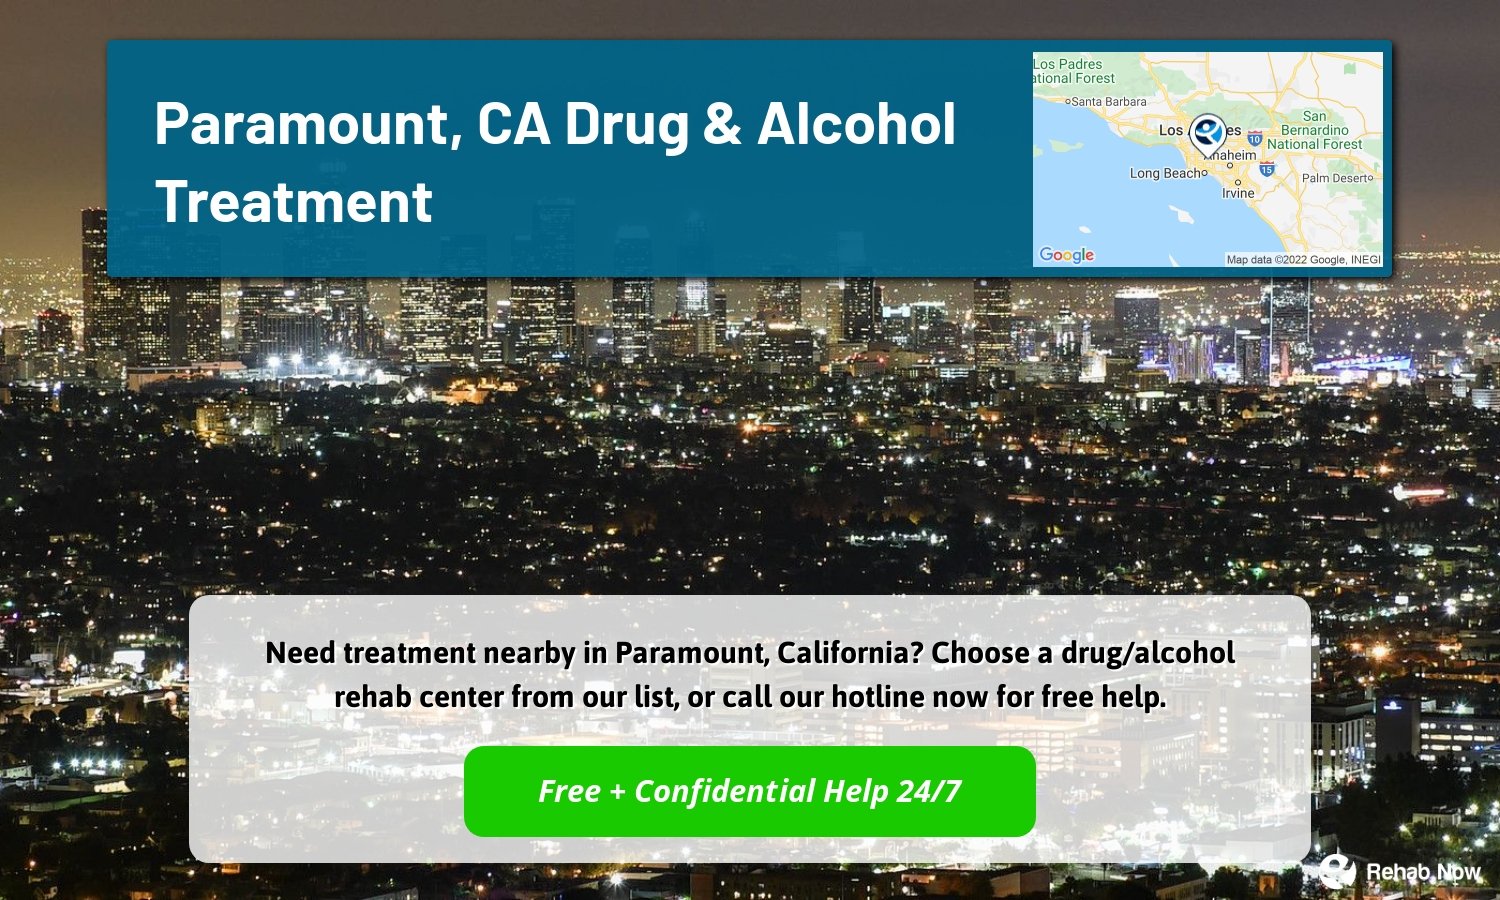 Need treatment nearby in Paramount, California? Choose a drug/alcohol rehab center from our list, or call our hotline now for free help.